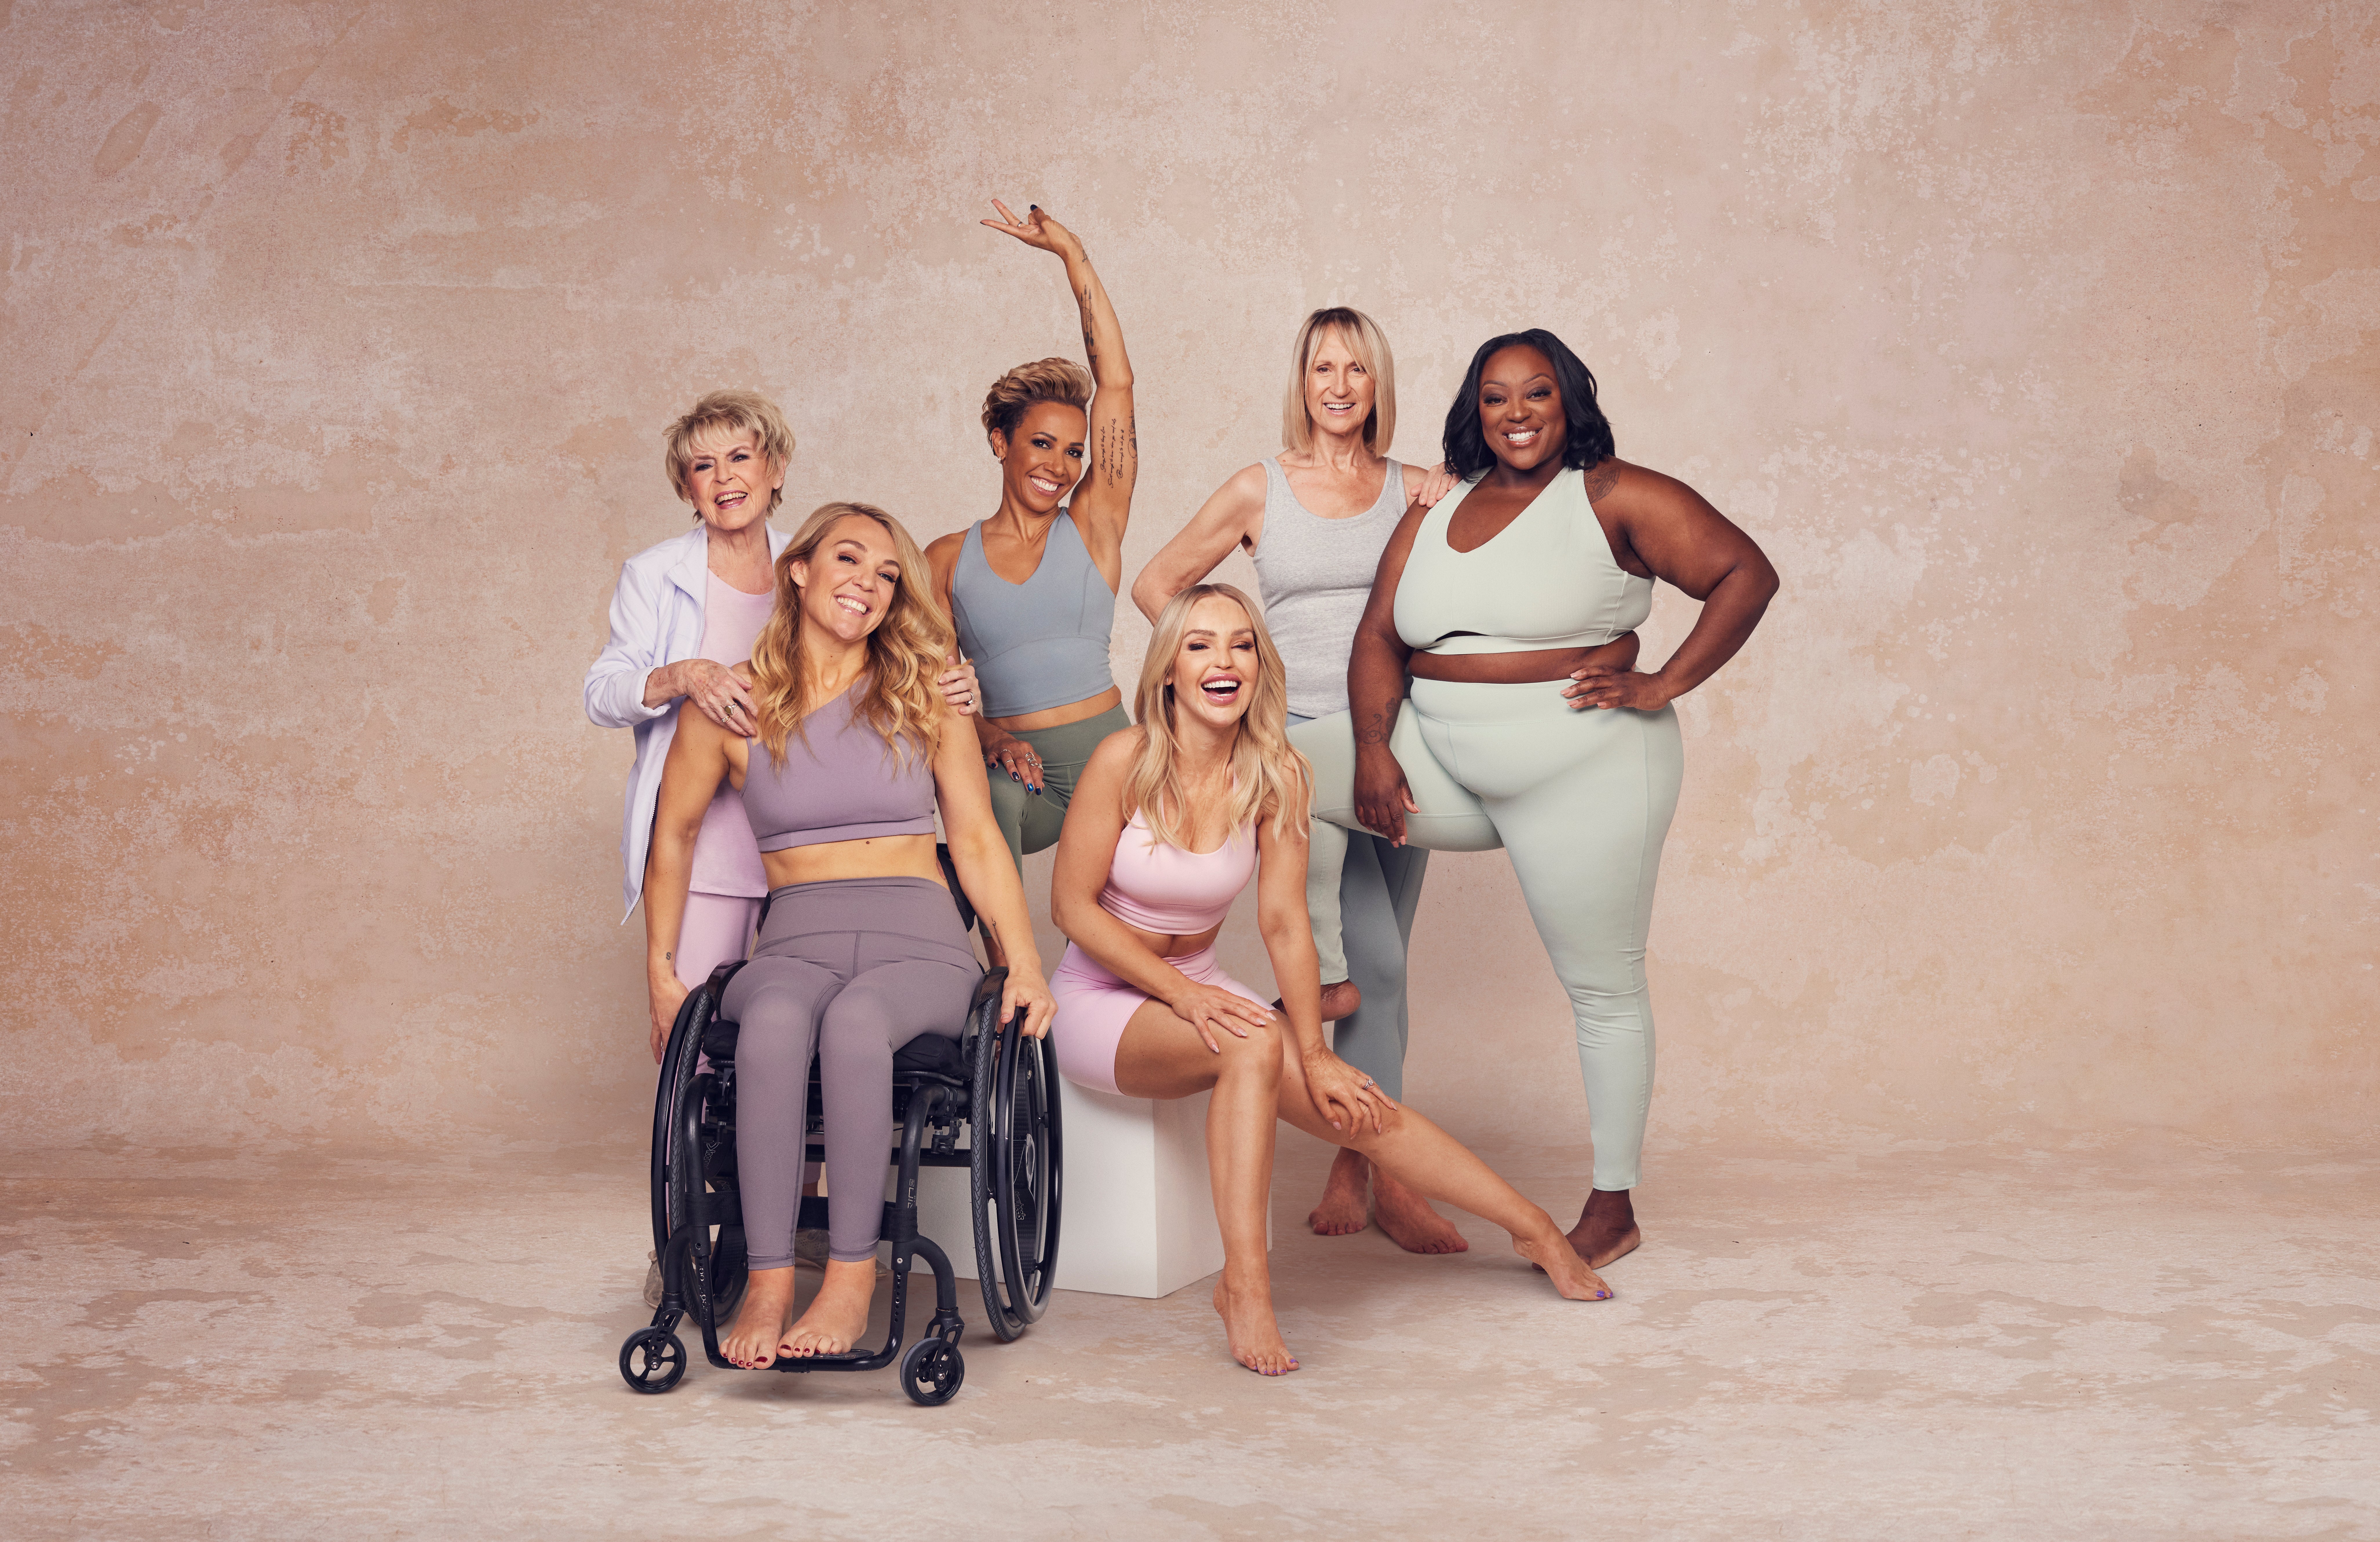 ITV1’s Loose Women launches Body Stories ‘Celebrating Every Body’campaign, featuring Carol McGiffin, Dame Kelly Holmes, Gloria Hunniford OBE, Judi Love, Katie Piper OBE and Sophie Morgan